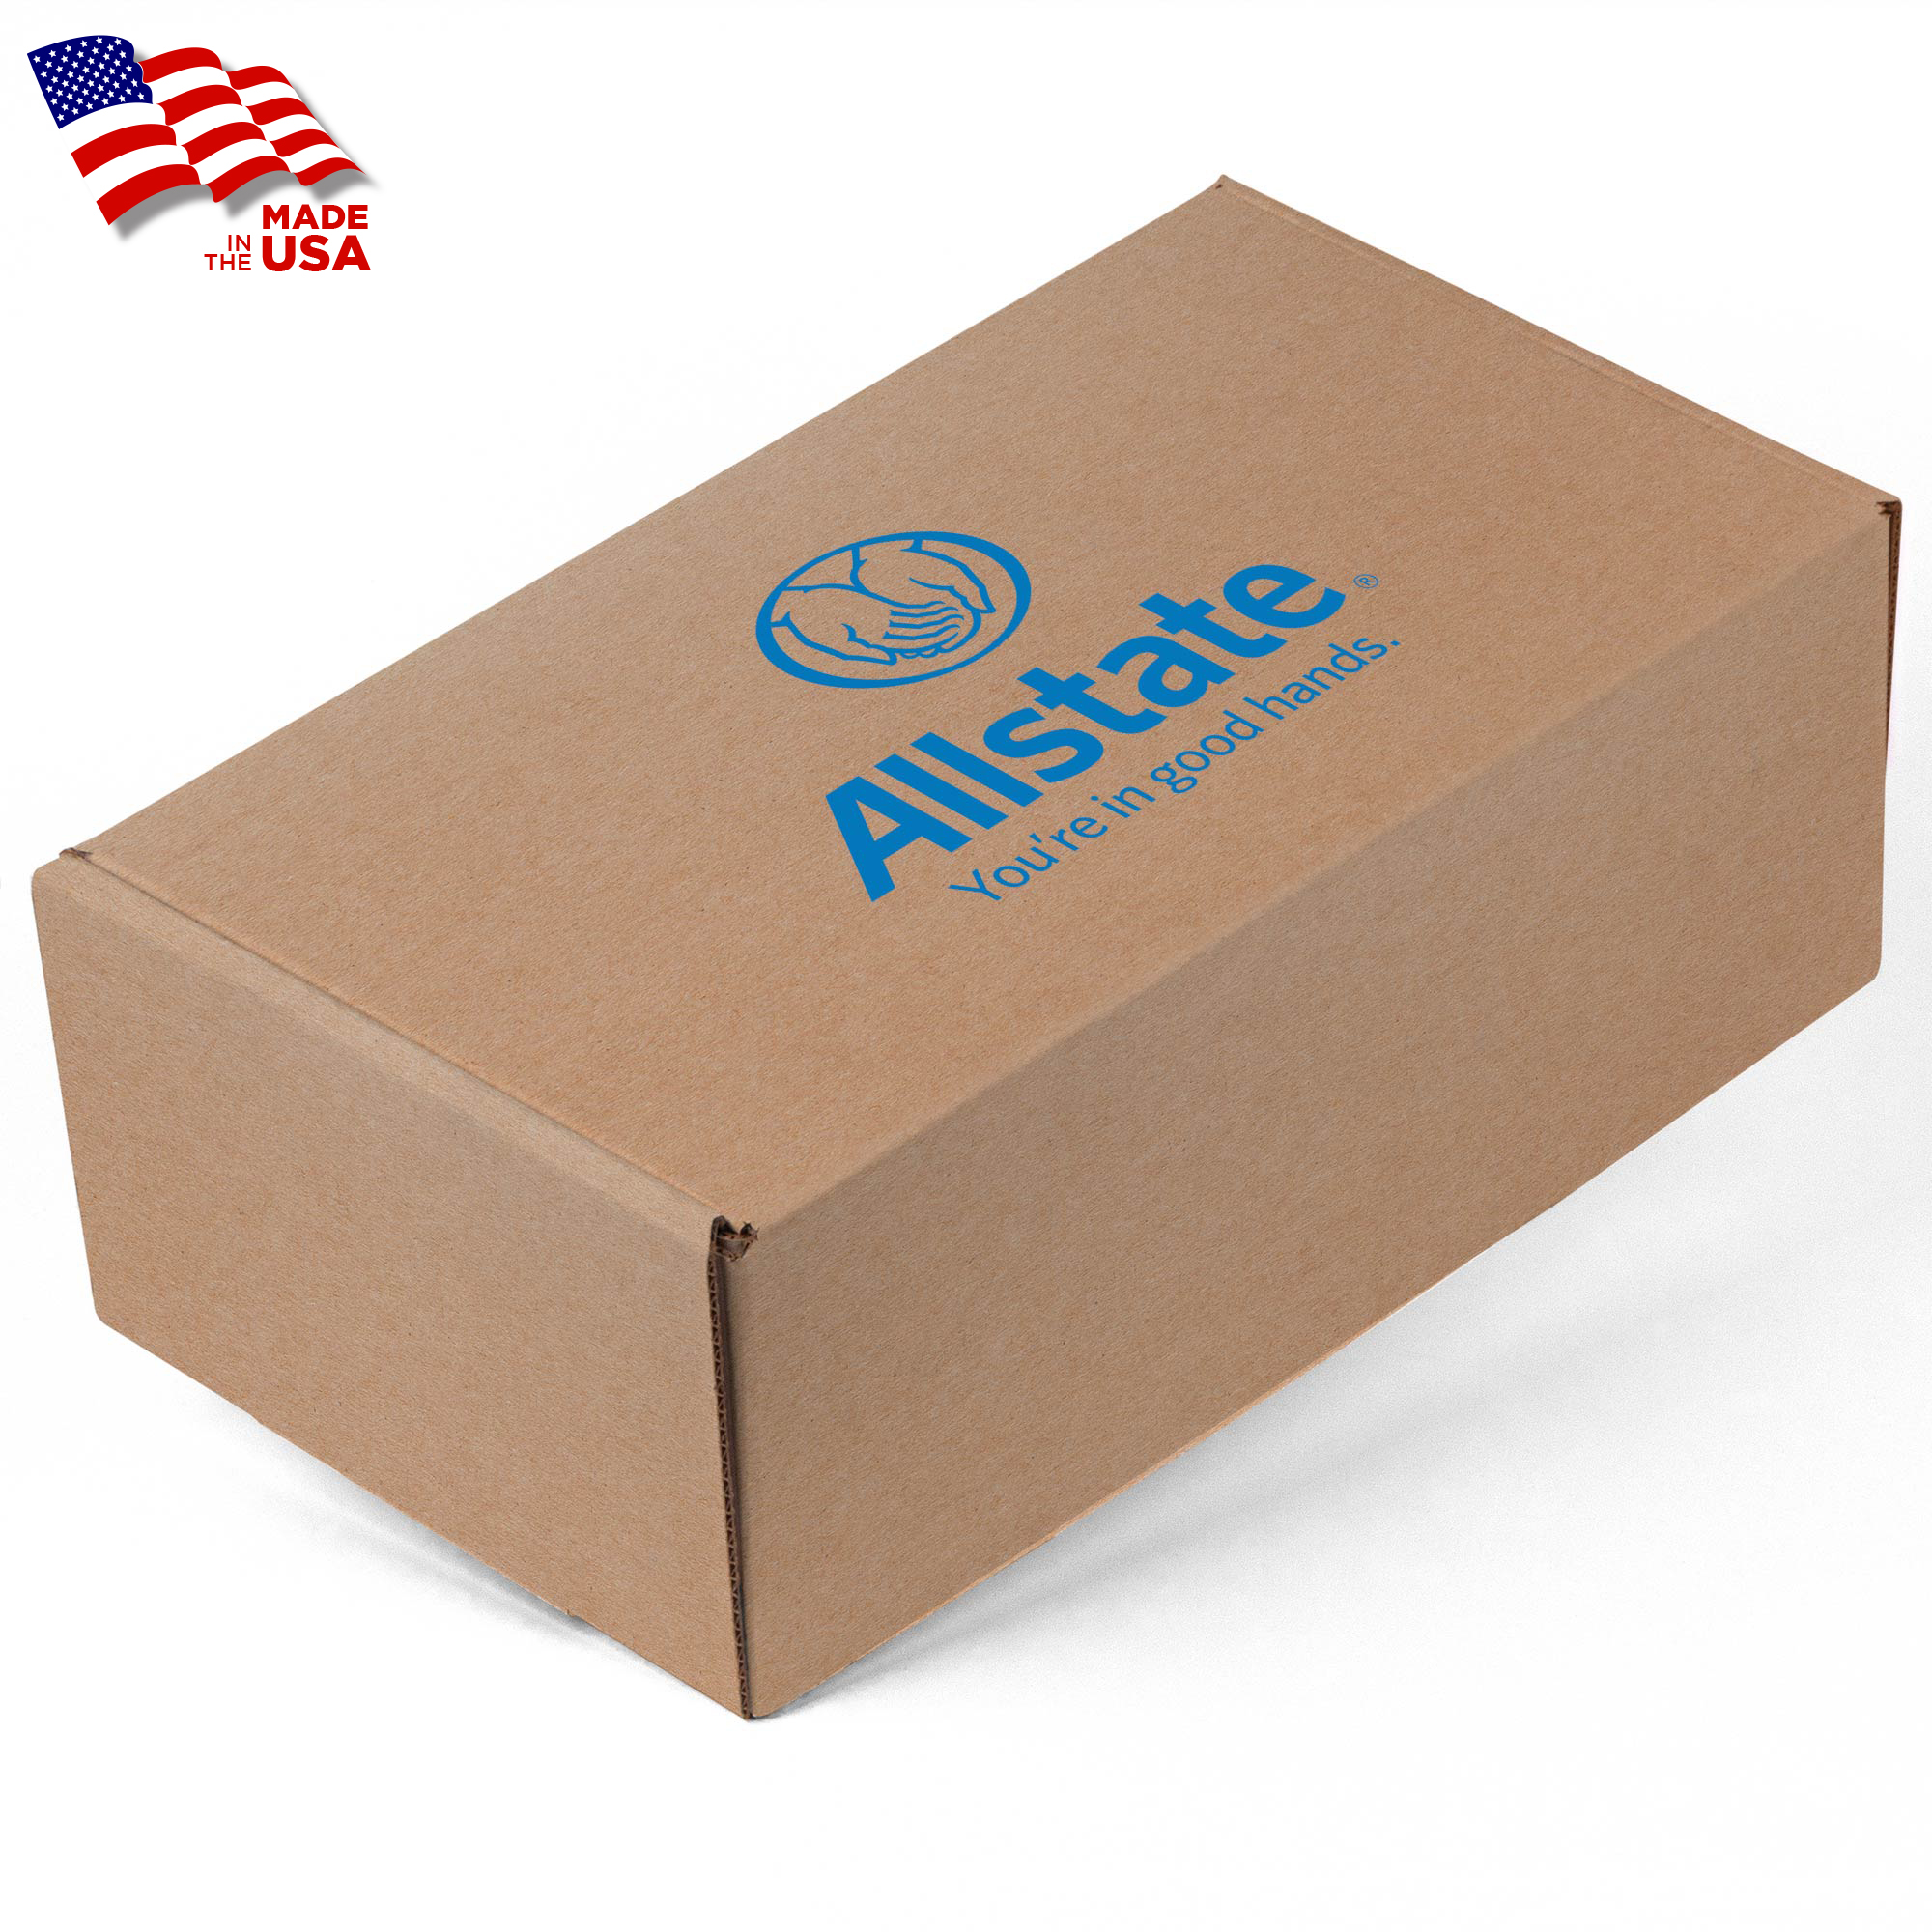 Screen Printed Corrugated Box Medium Box 11x6.5x4 For Mailers, Gifting And Kits - Printed boxes are a great way for making a custom branded presentations, direct mail marketing campaigns, custom gifts, subscription boxes, influencer boxes, 'Welcome' kits, new product launches and more! FEATURES: Eco-friendly. Biodegradable. Compostable. Recyclable. Made in USA.